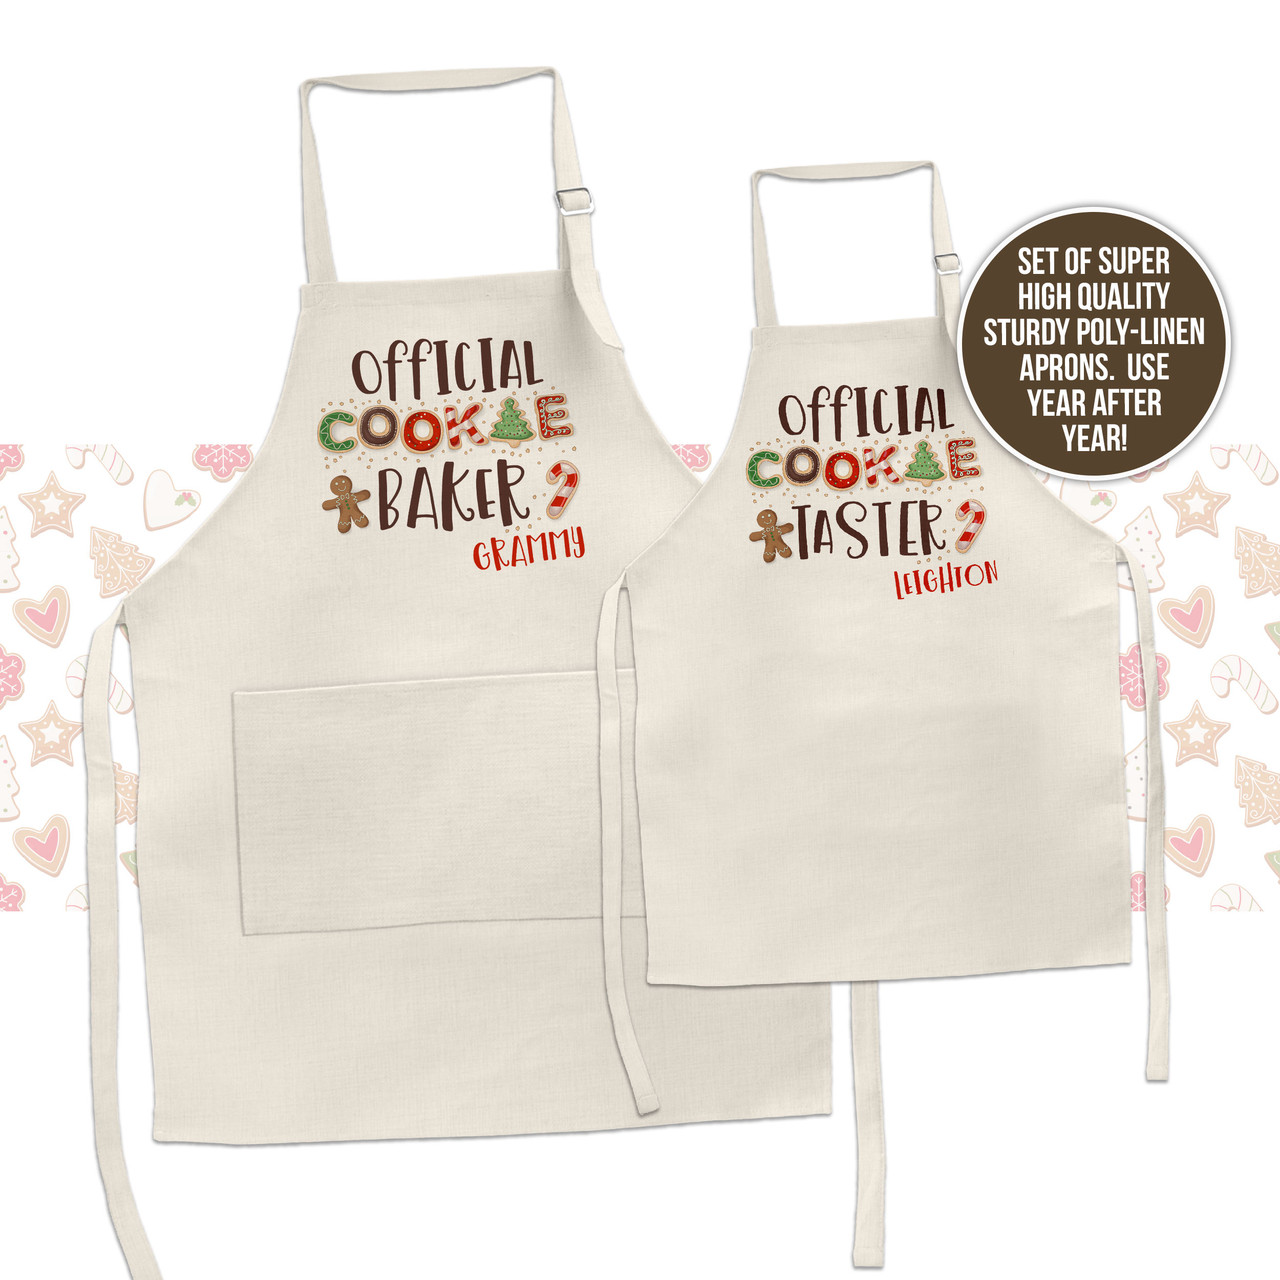 https://cdn11.bigcommerce.com/s-6a772/images/stencil/1280x1280/products/5669/104279/apron-replacement-both-linen-now__70811.1699271691.jpg?c=2